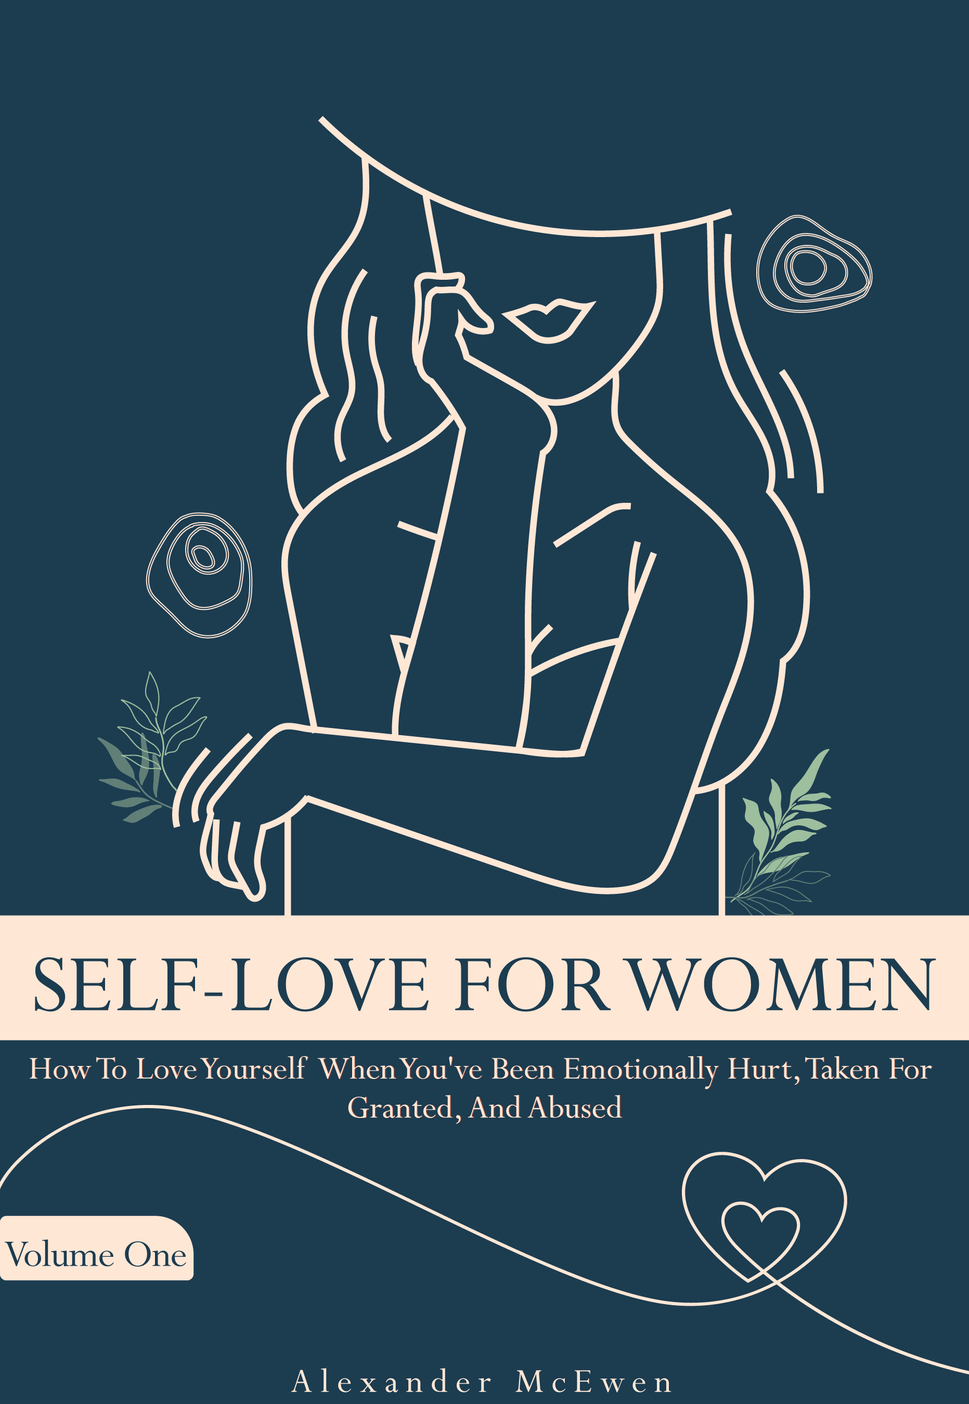 How To Find Healing After Emotional Abuse? New Self-Empowerment Book For Women